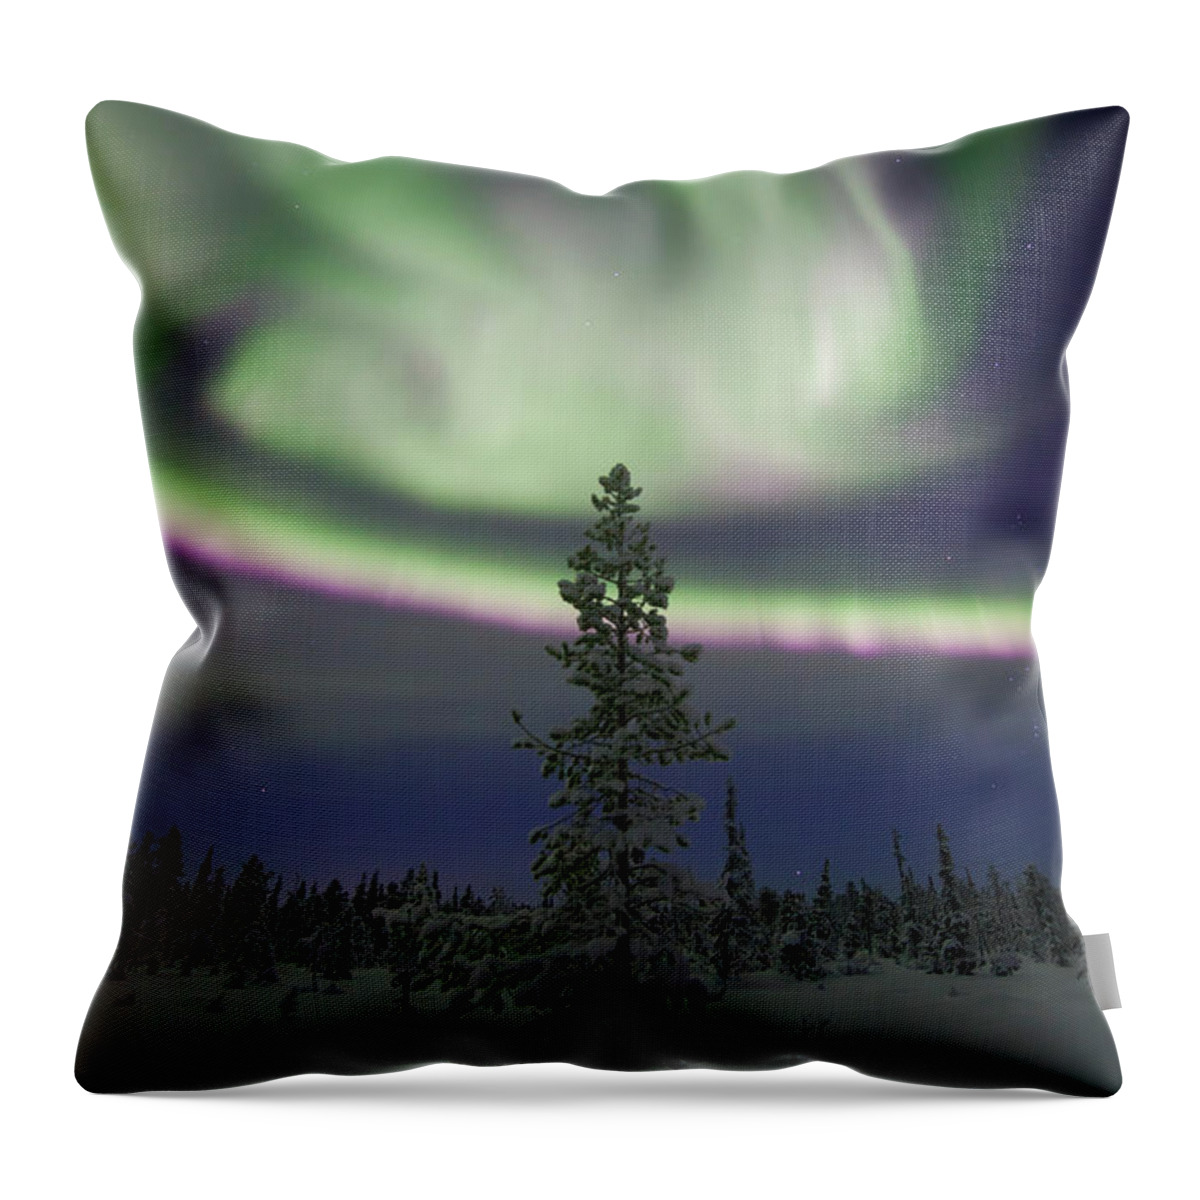 Extreme Terrain Throw Pillow featuring the photograph Aurora Borealis Over A Frozen Forest by Antonyspencer